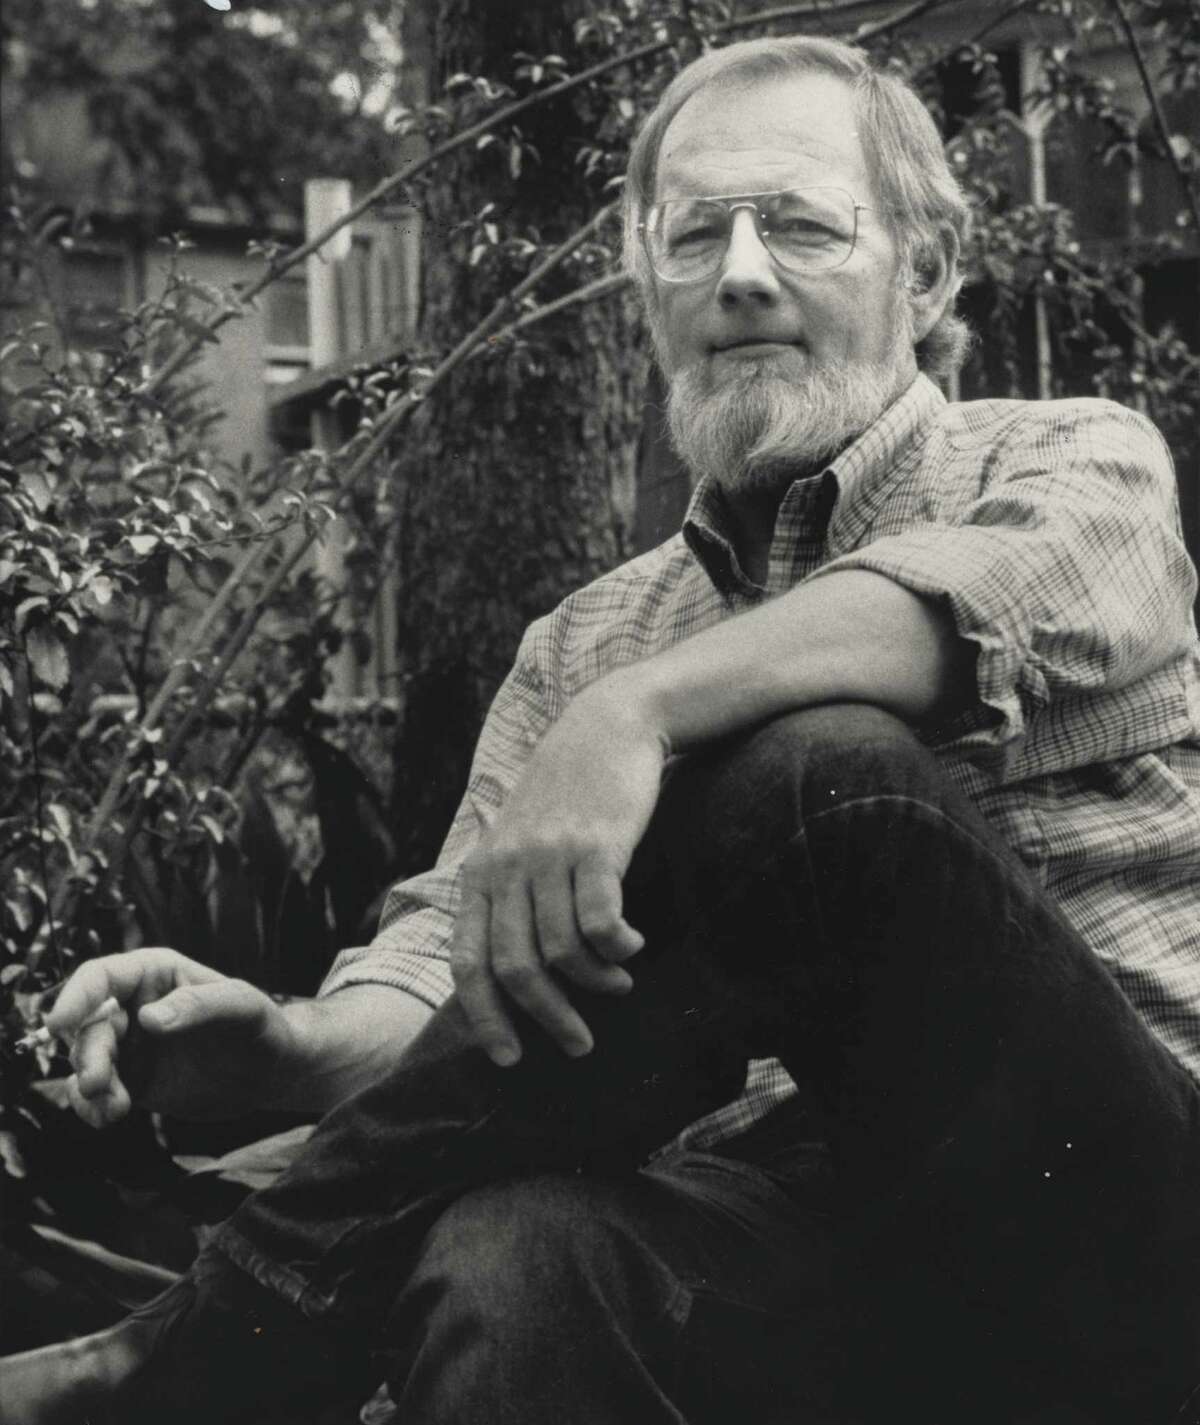 Short story writer and novelist Donald Barthelme returned to Houston to teach soon after the University of Houston's creative writing program began. By the late 1990s, it would be named one of the top two writing programs in the country.